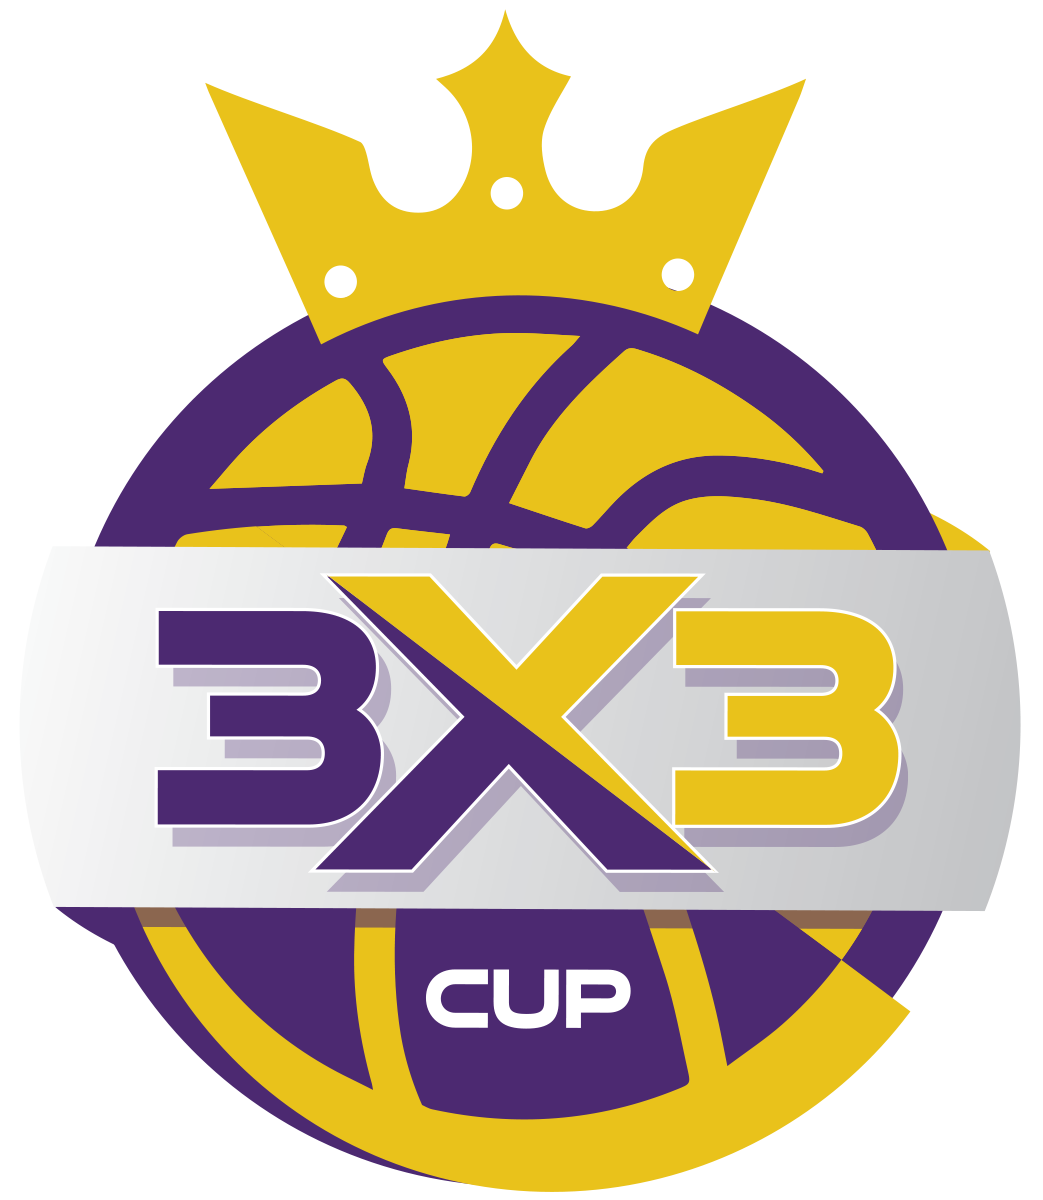 3x3 Cup